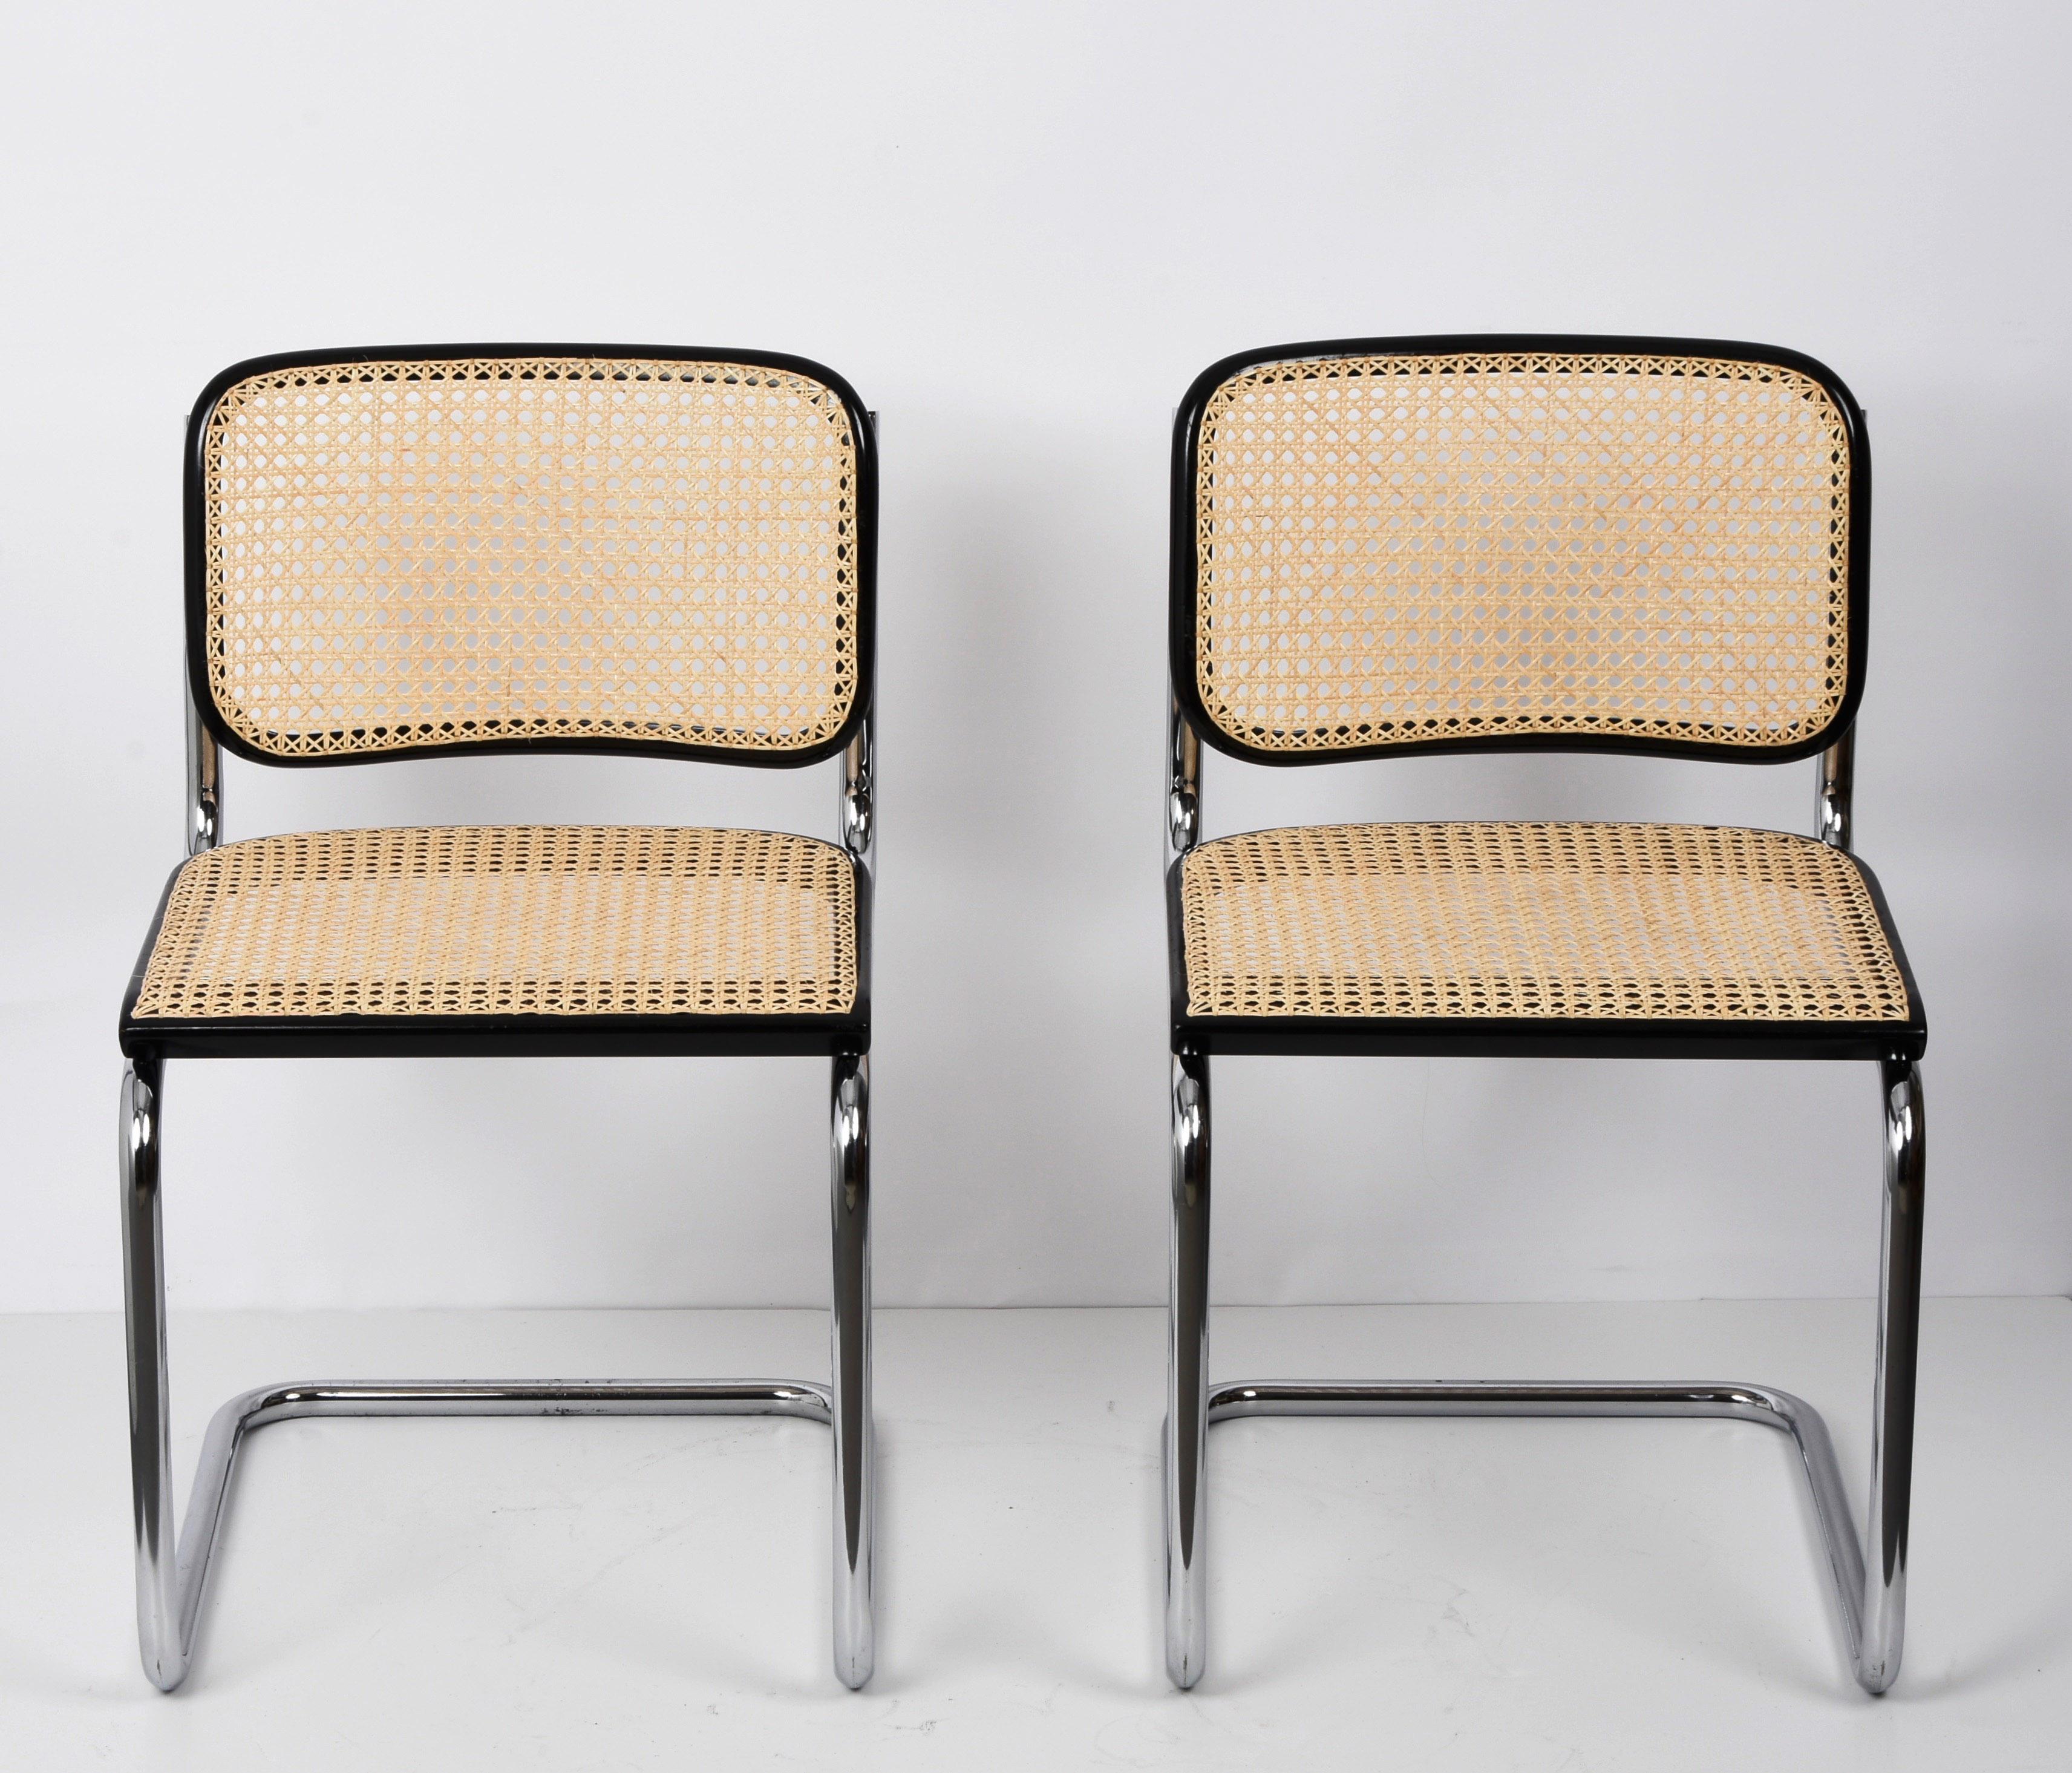 Pair of Midcentury Marcel Breuer Chrome and Rattan Cesca Chairs for Gavina 1970s For Sale 10